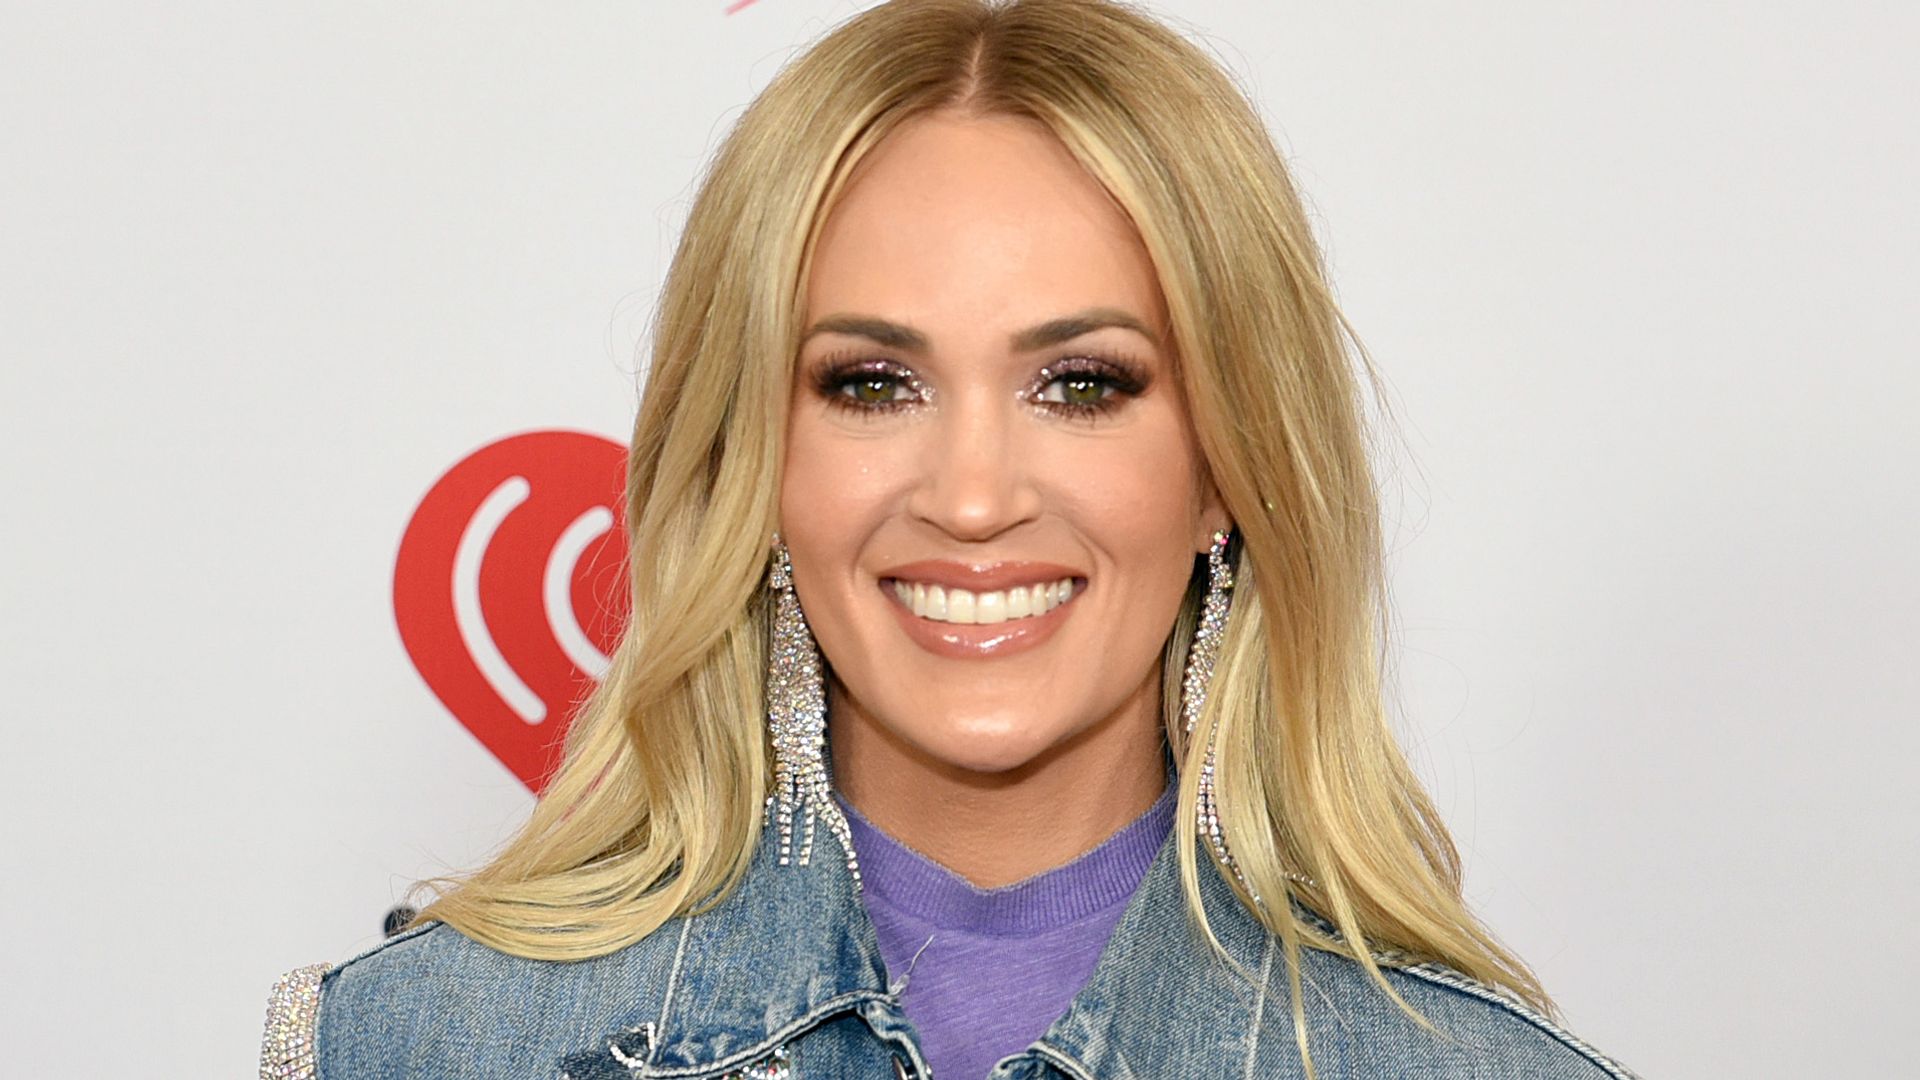 Carrie Underwood 'just wanted to have fun' on 'Denim and